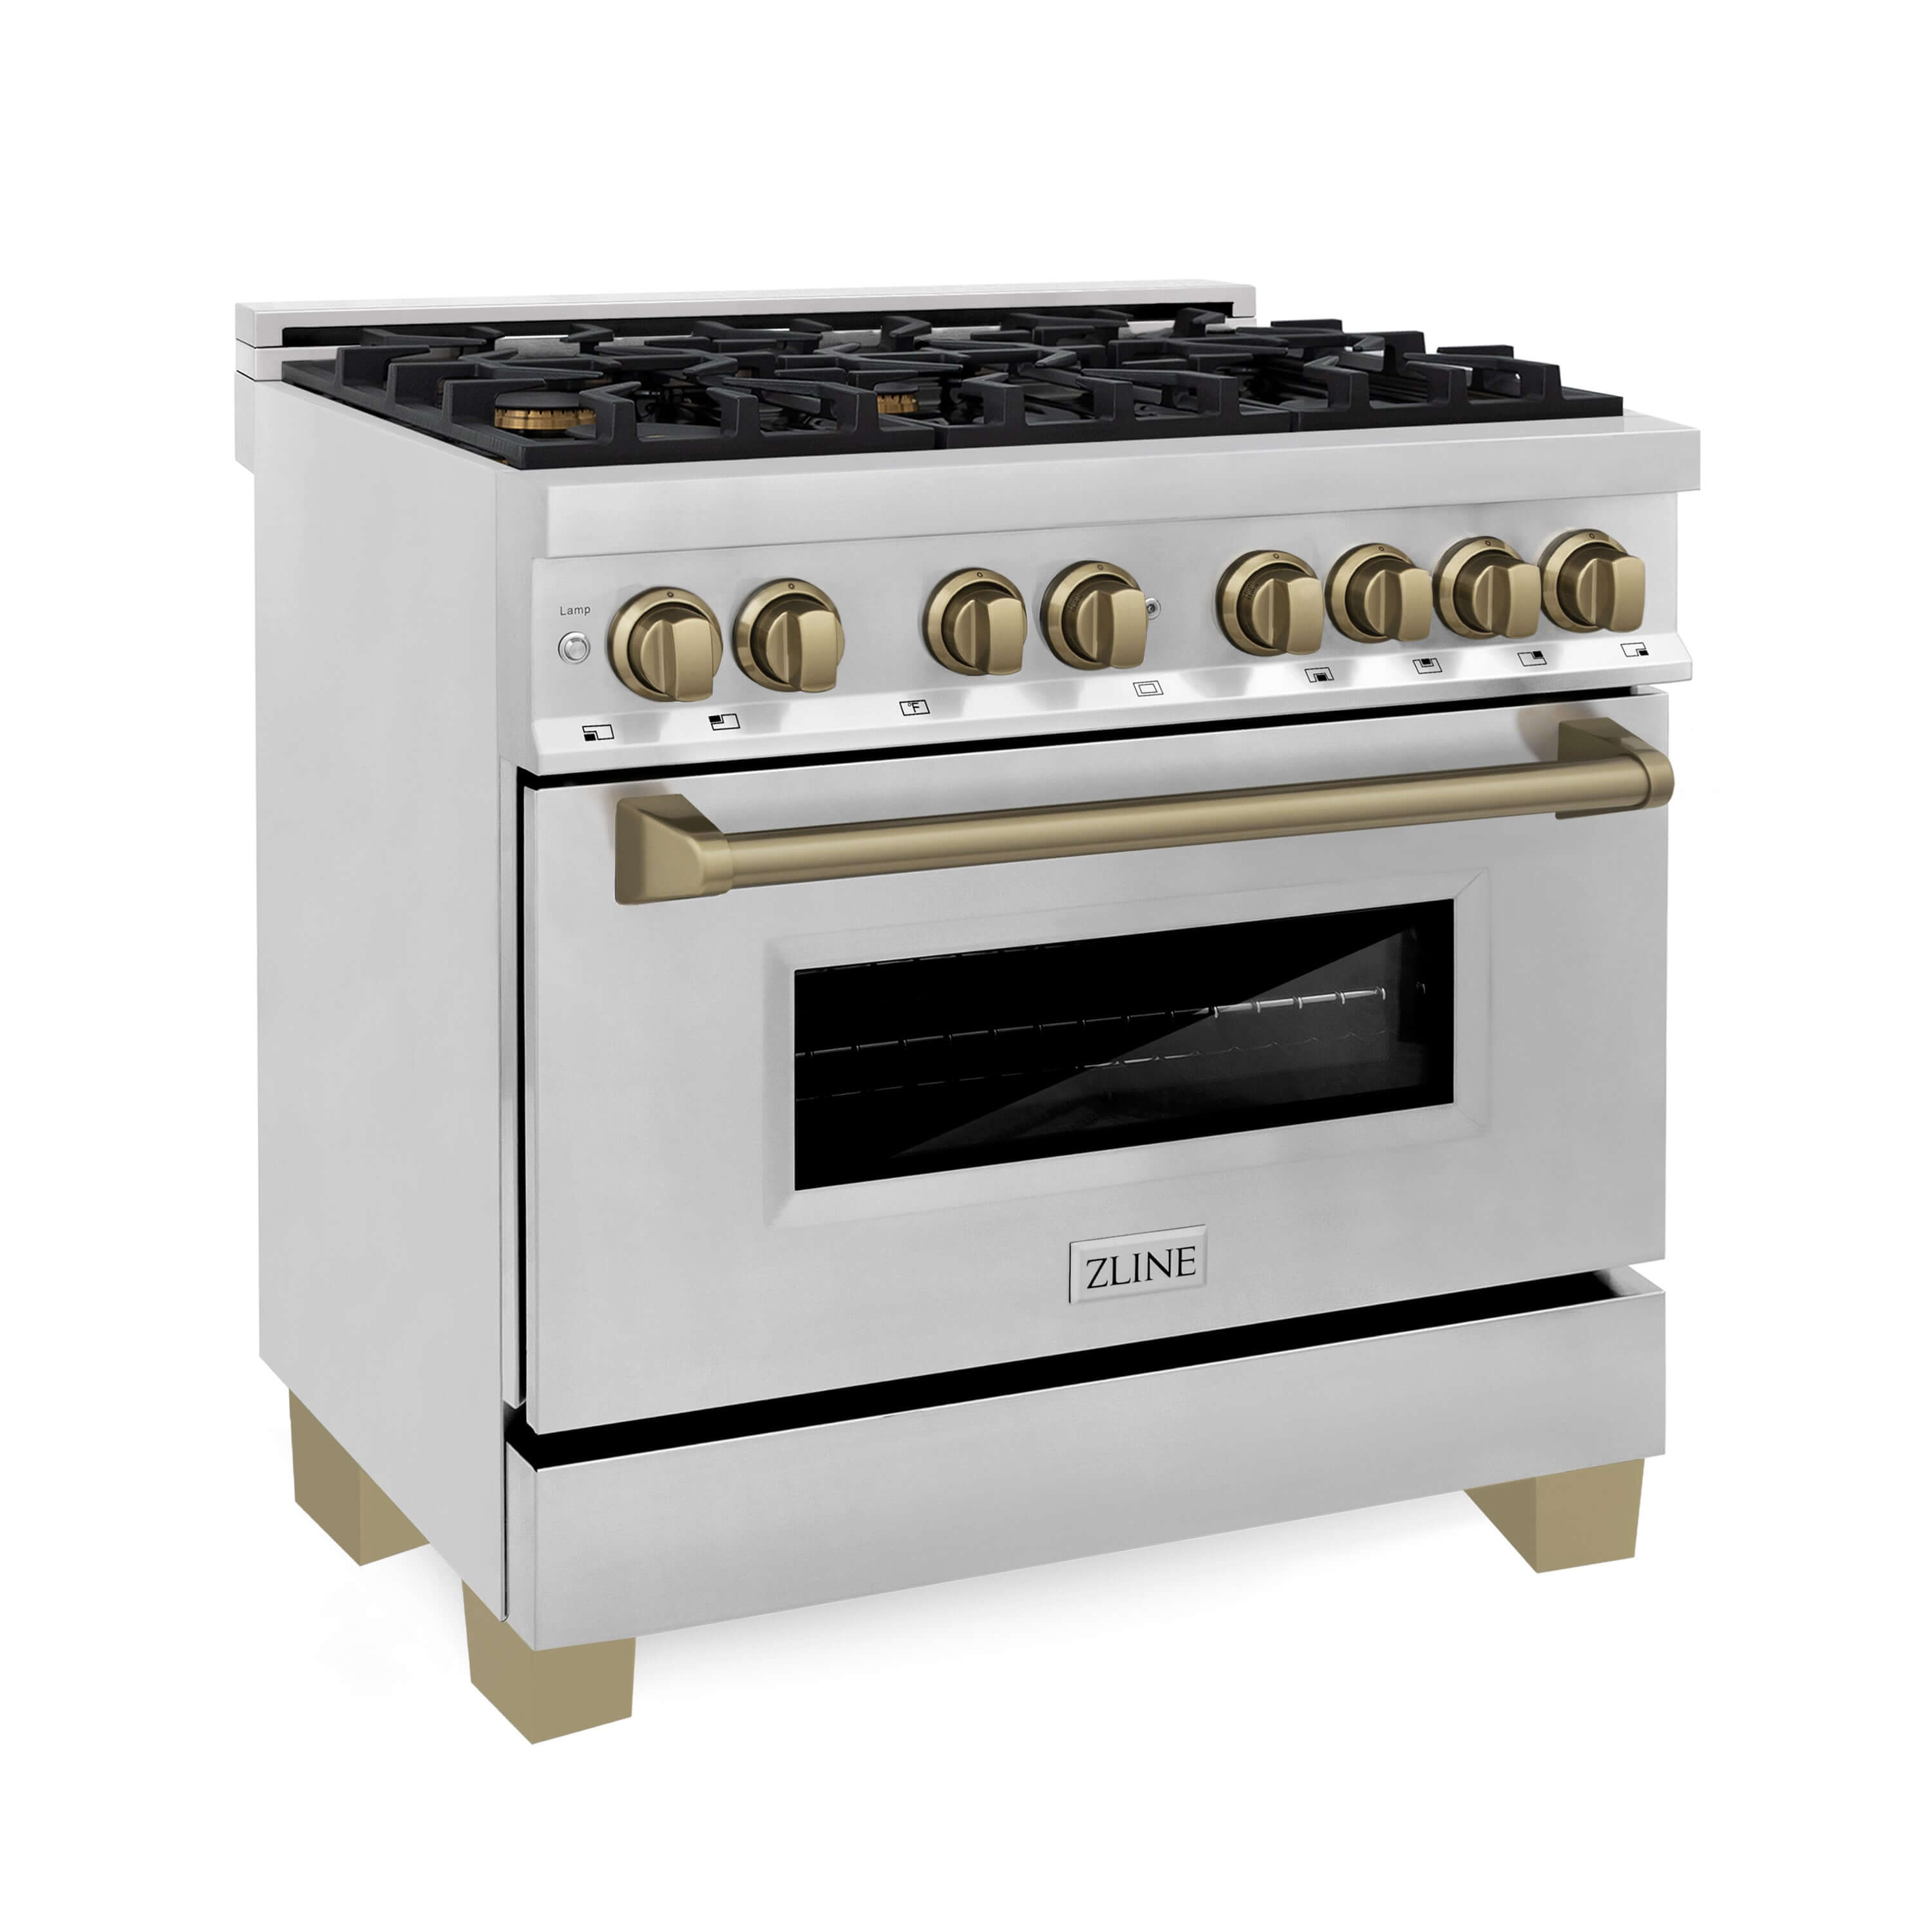 ZLINE Autograph Edition 36 in. Dual Fuel Range in Stainless Steel with Champagne Bronze Accents